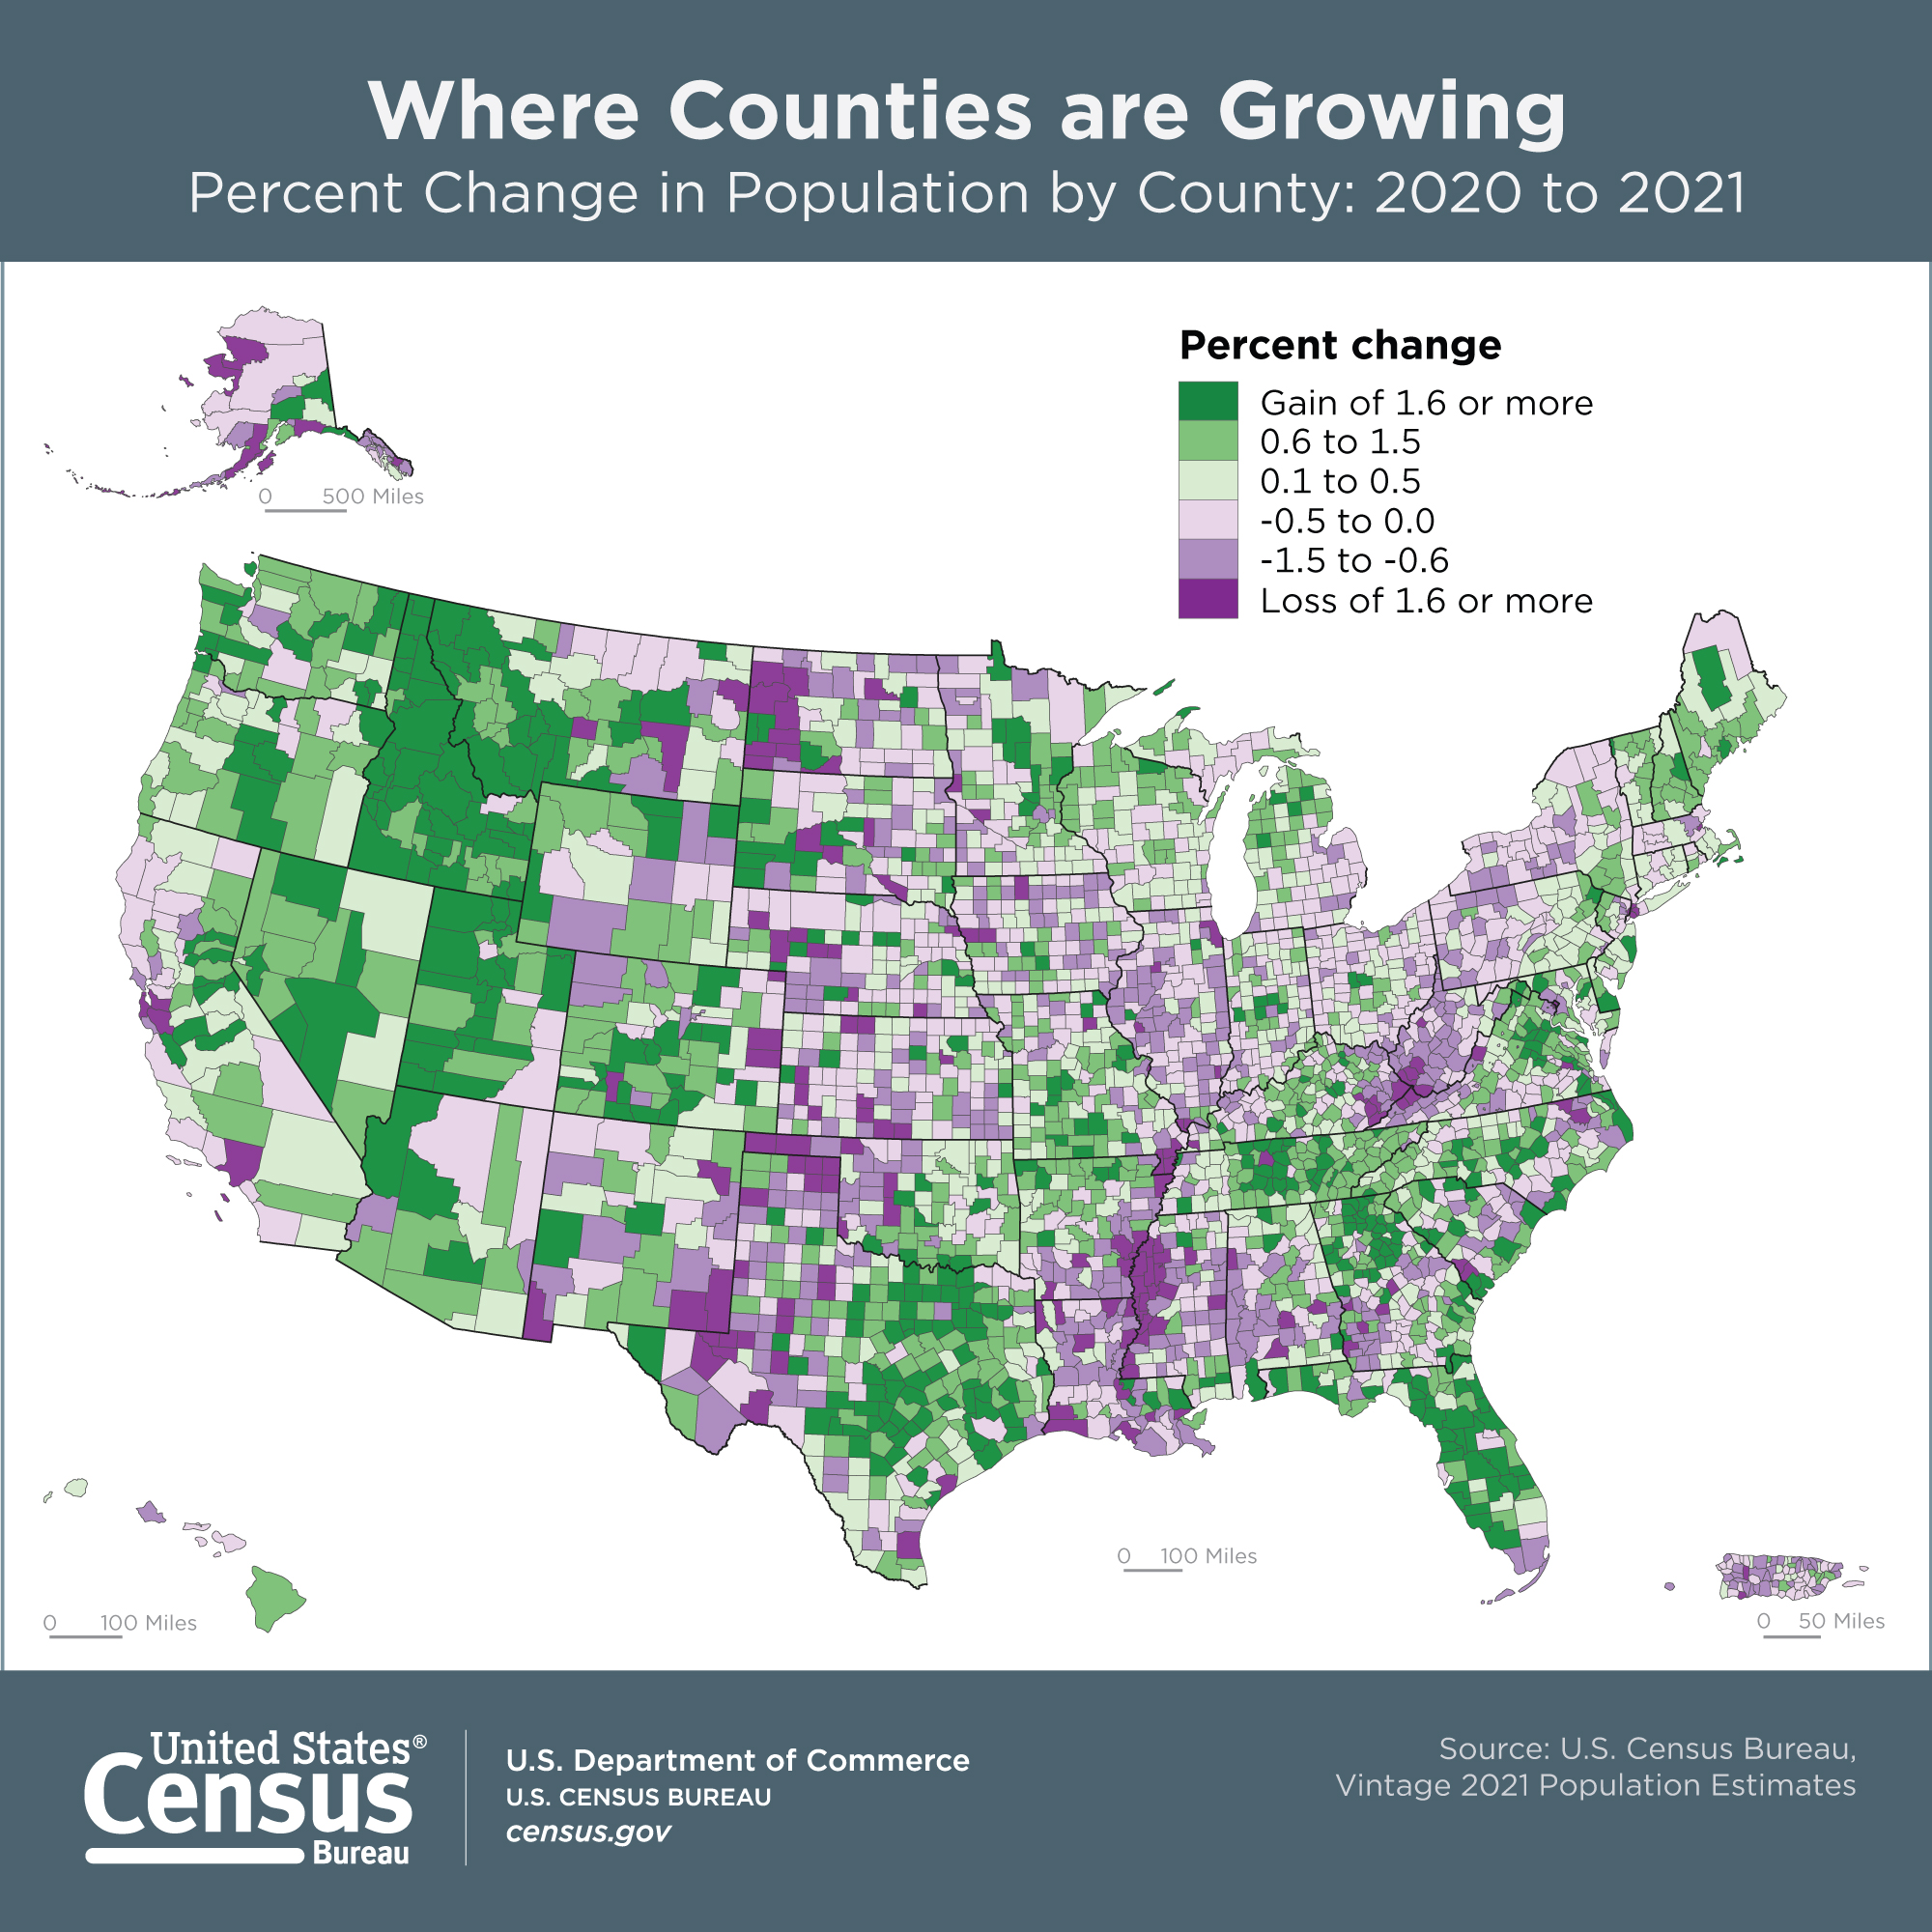 https://www.census.gov/content/dam/Census/library/visualizations/2022/comm/where-counties-are-growing.jpg